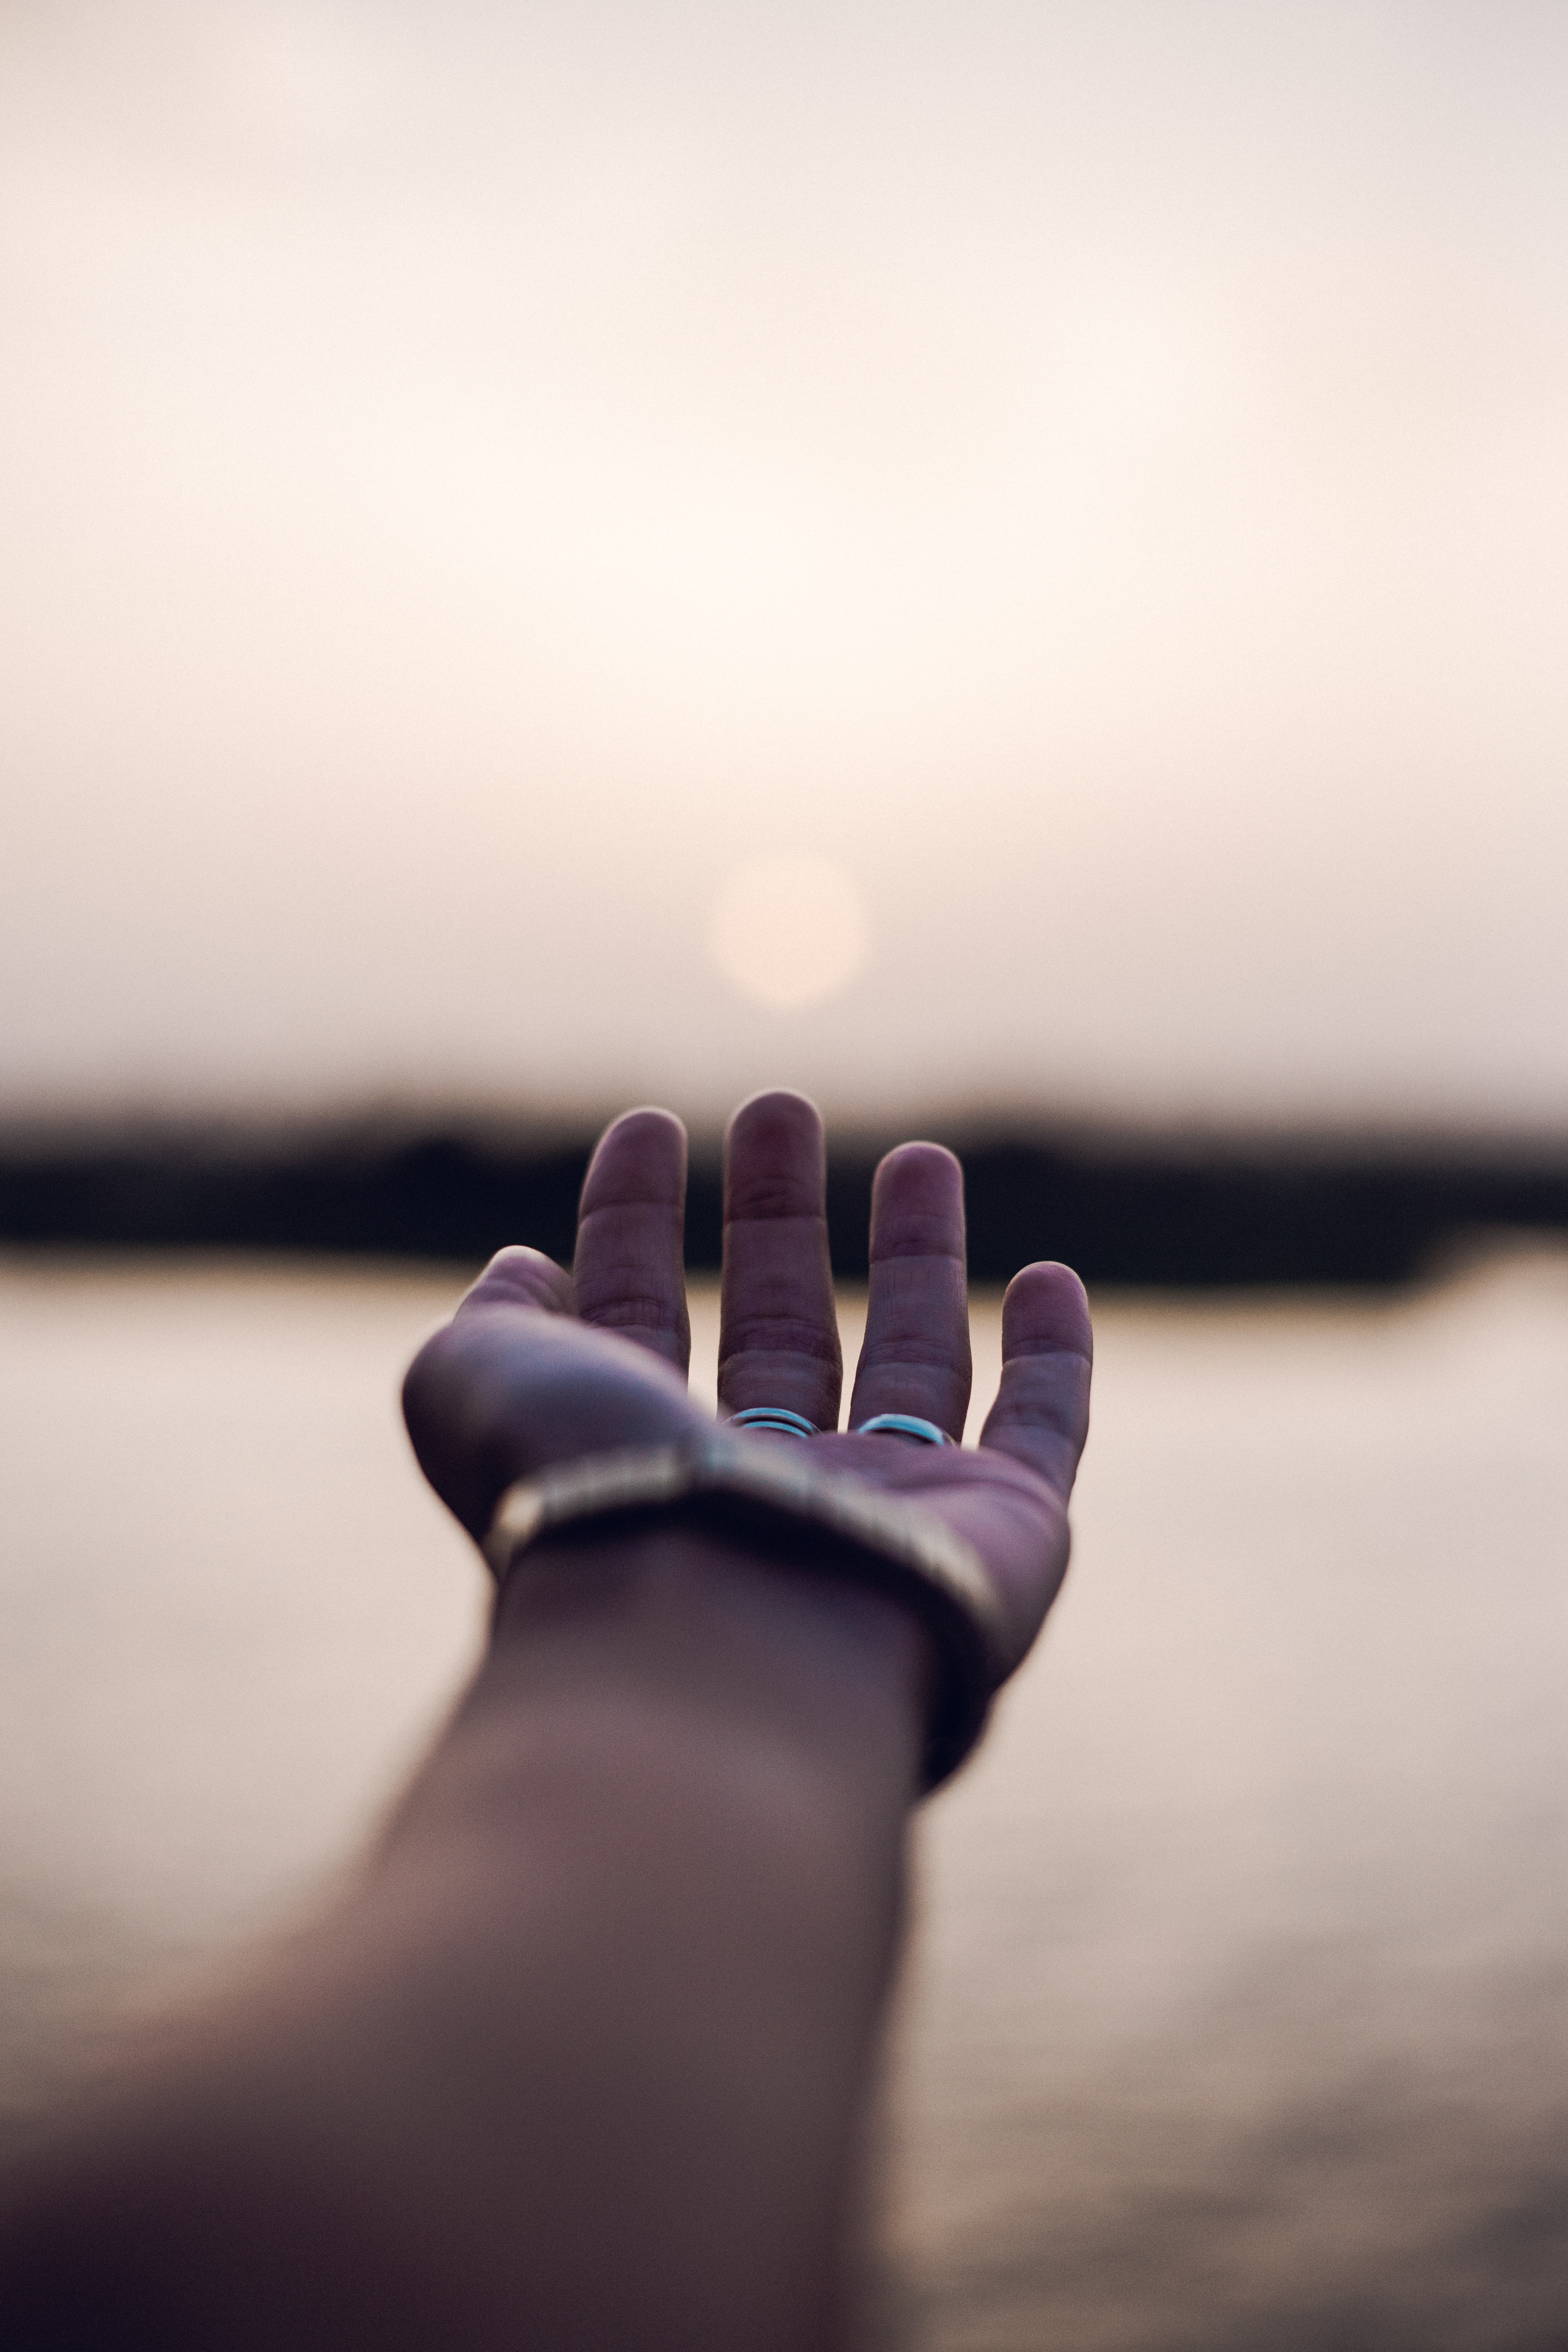 New Lock Screen Wallpapers hand, miscellanea, miscellaneous, blur, smooth, palm, fingers, stretch out, extend